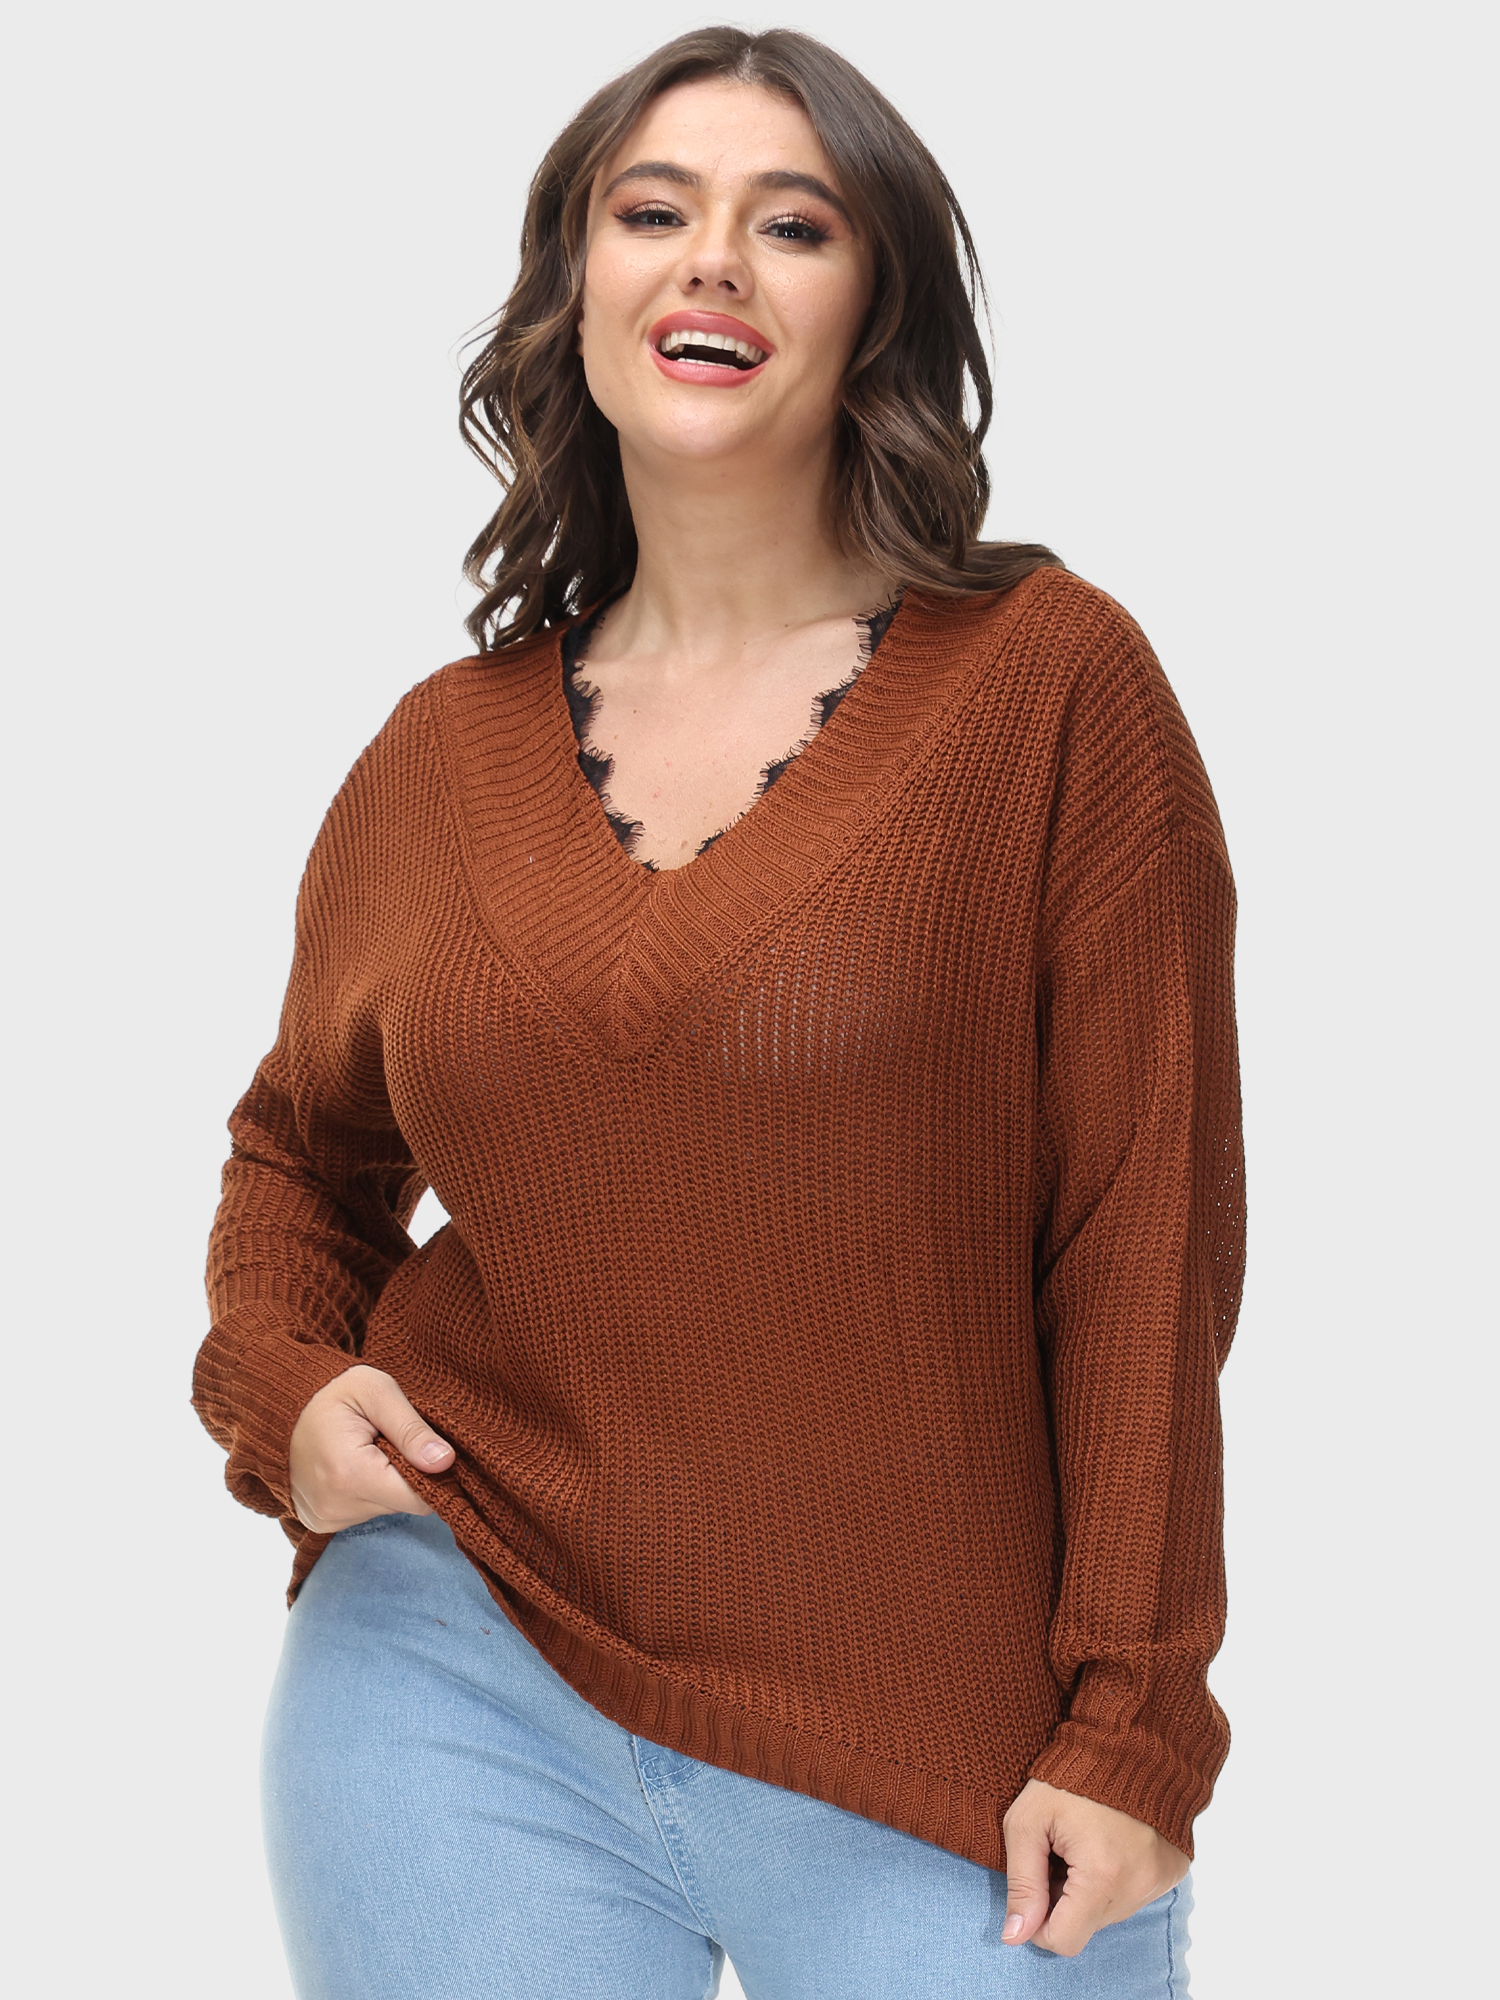 Loose V-Neck Lace Sweater